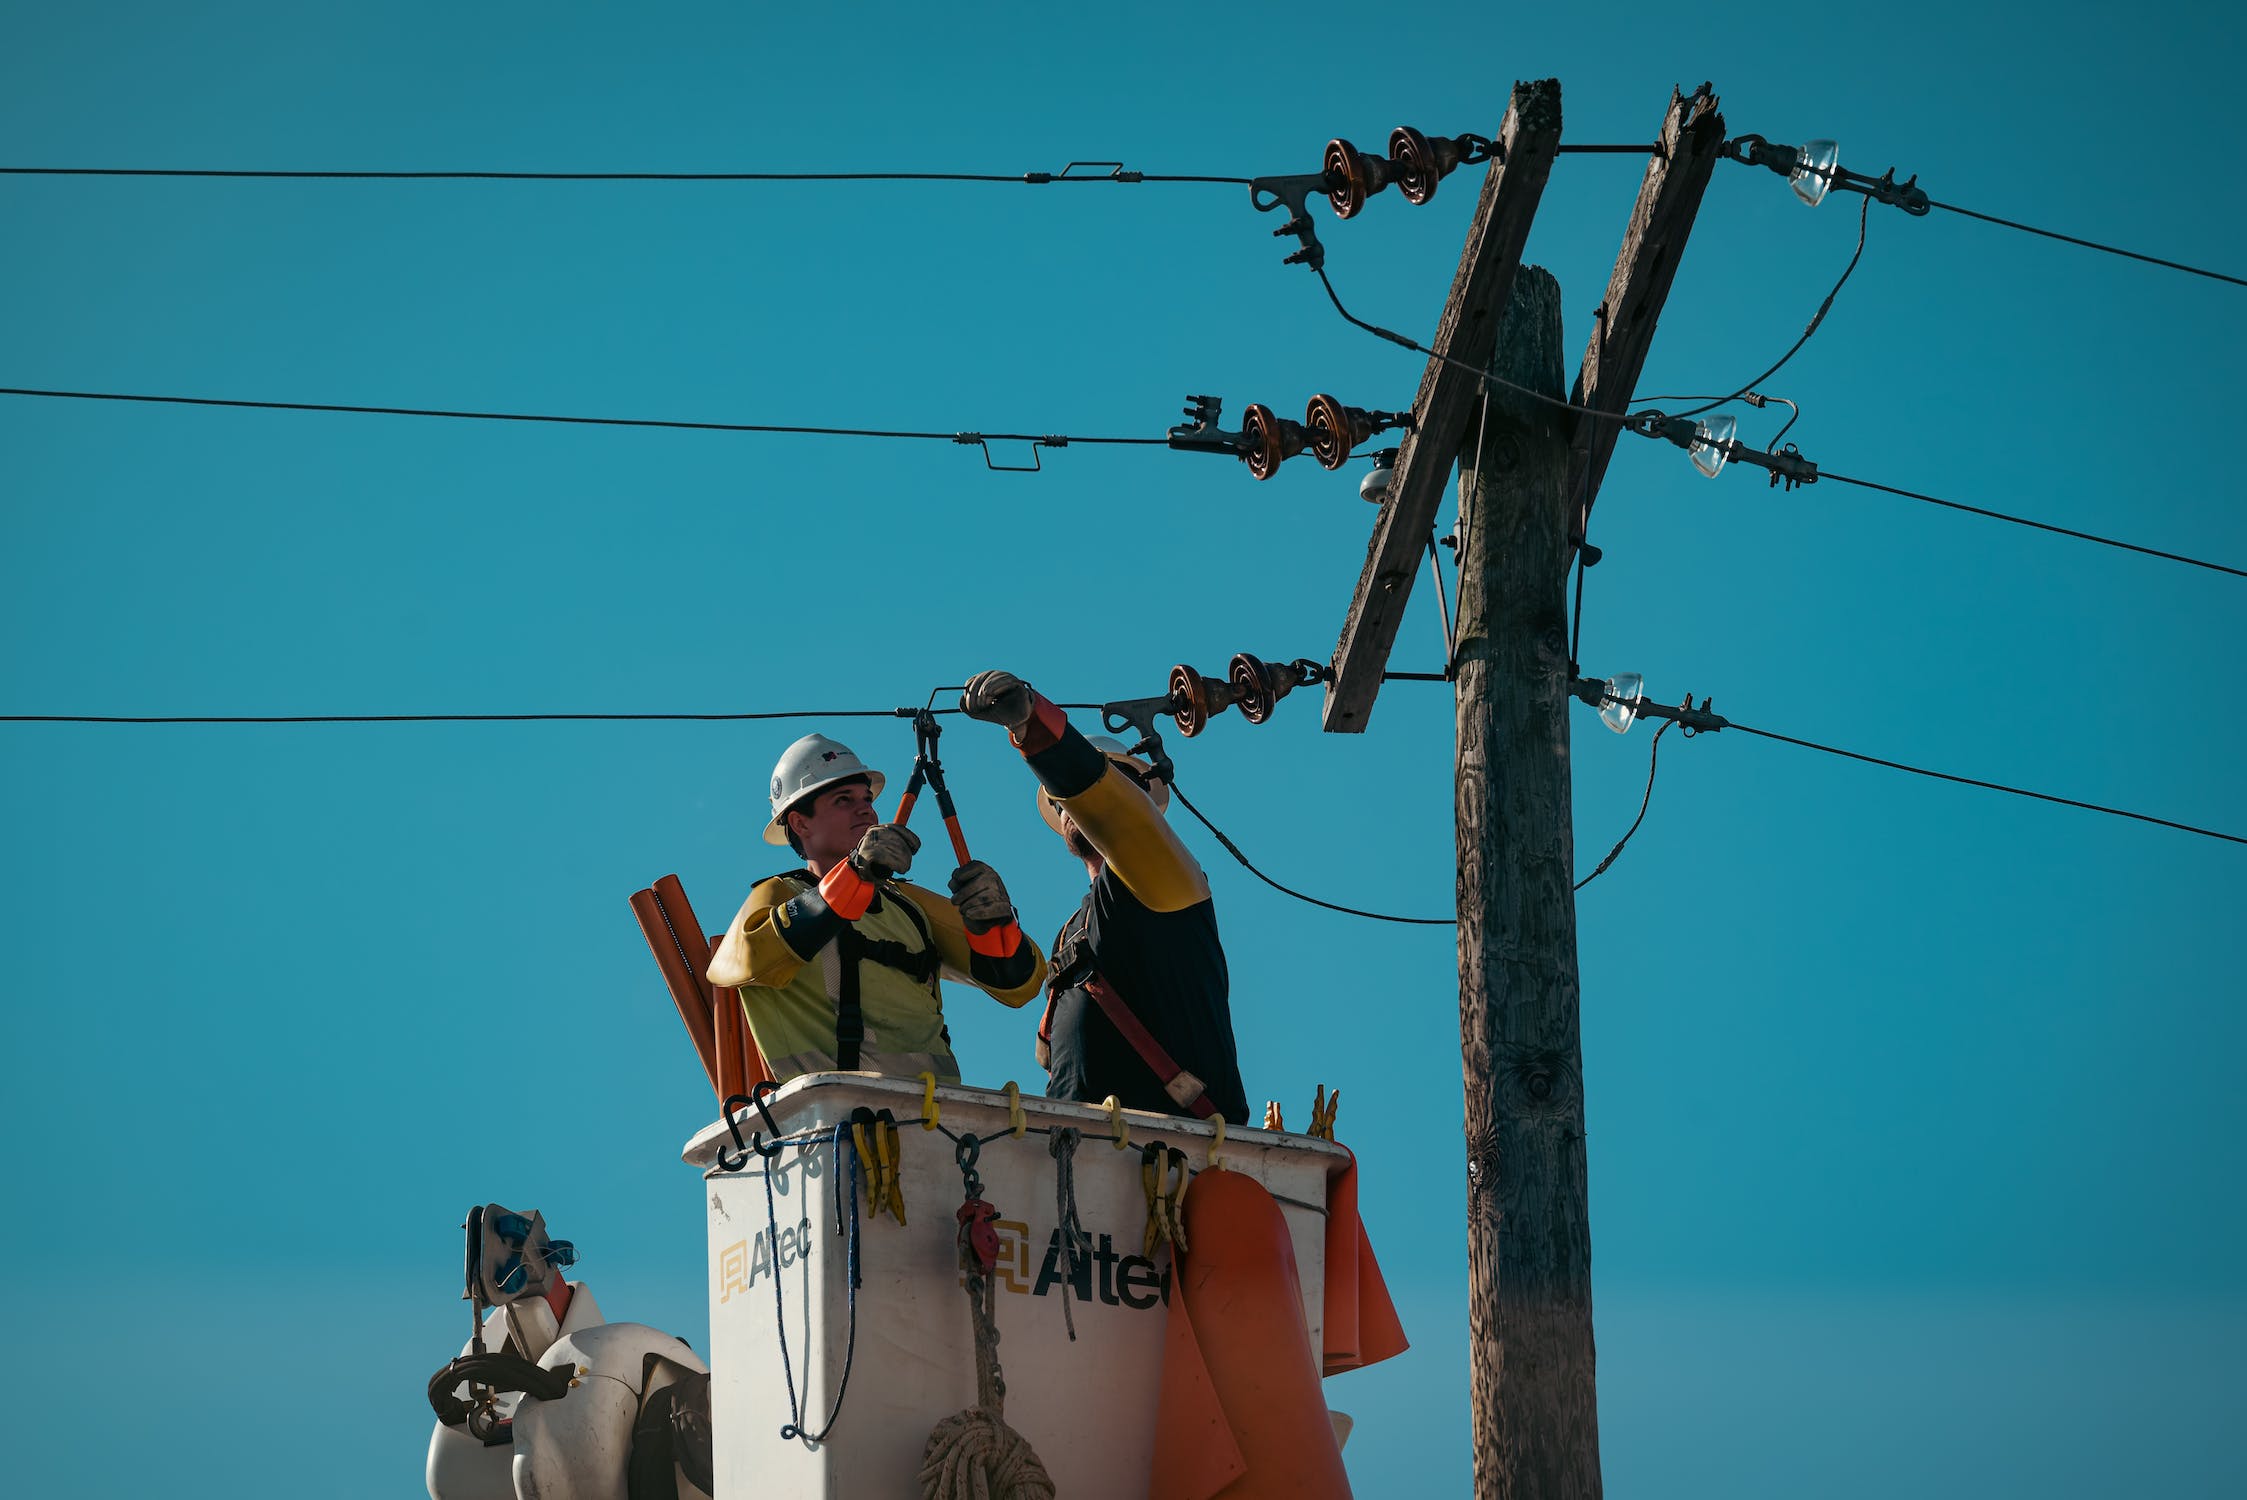 Hard hat workers attend to a power line.